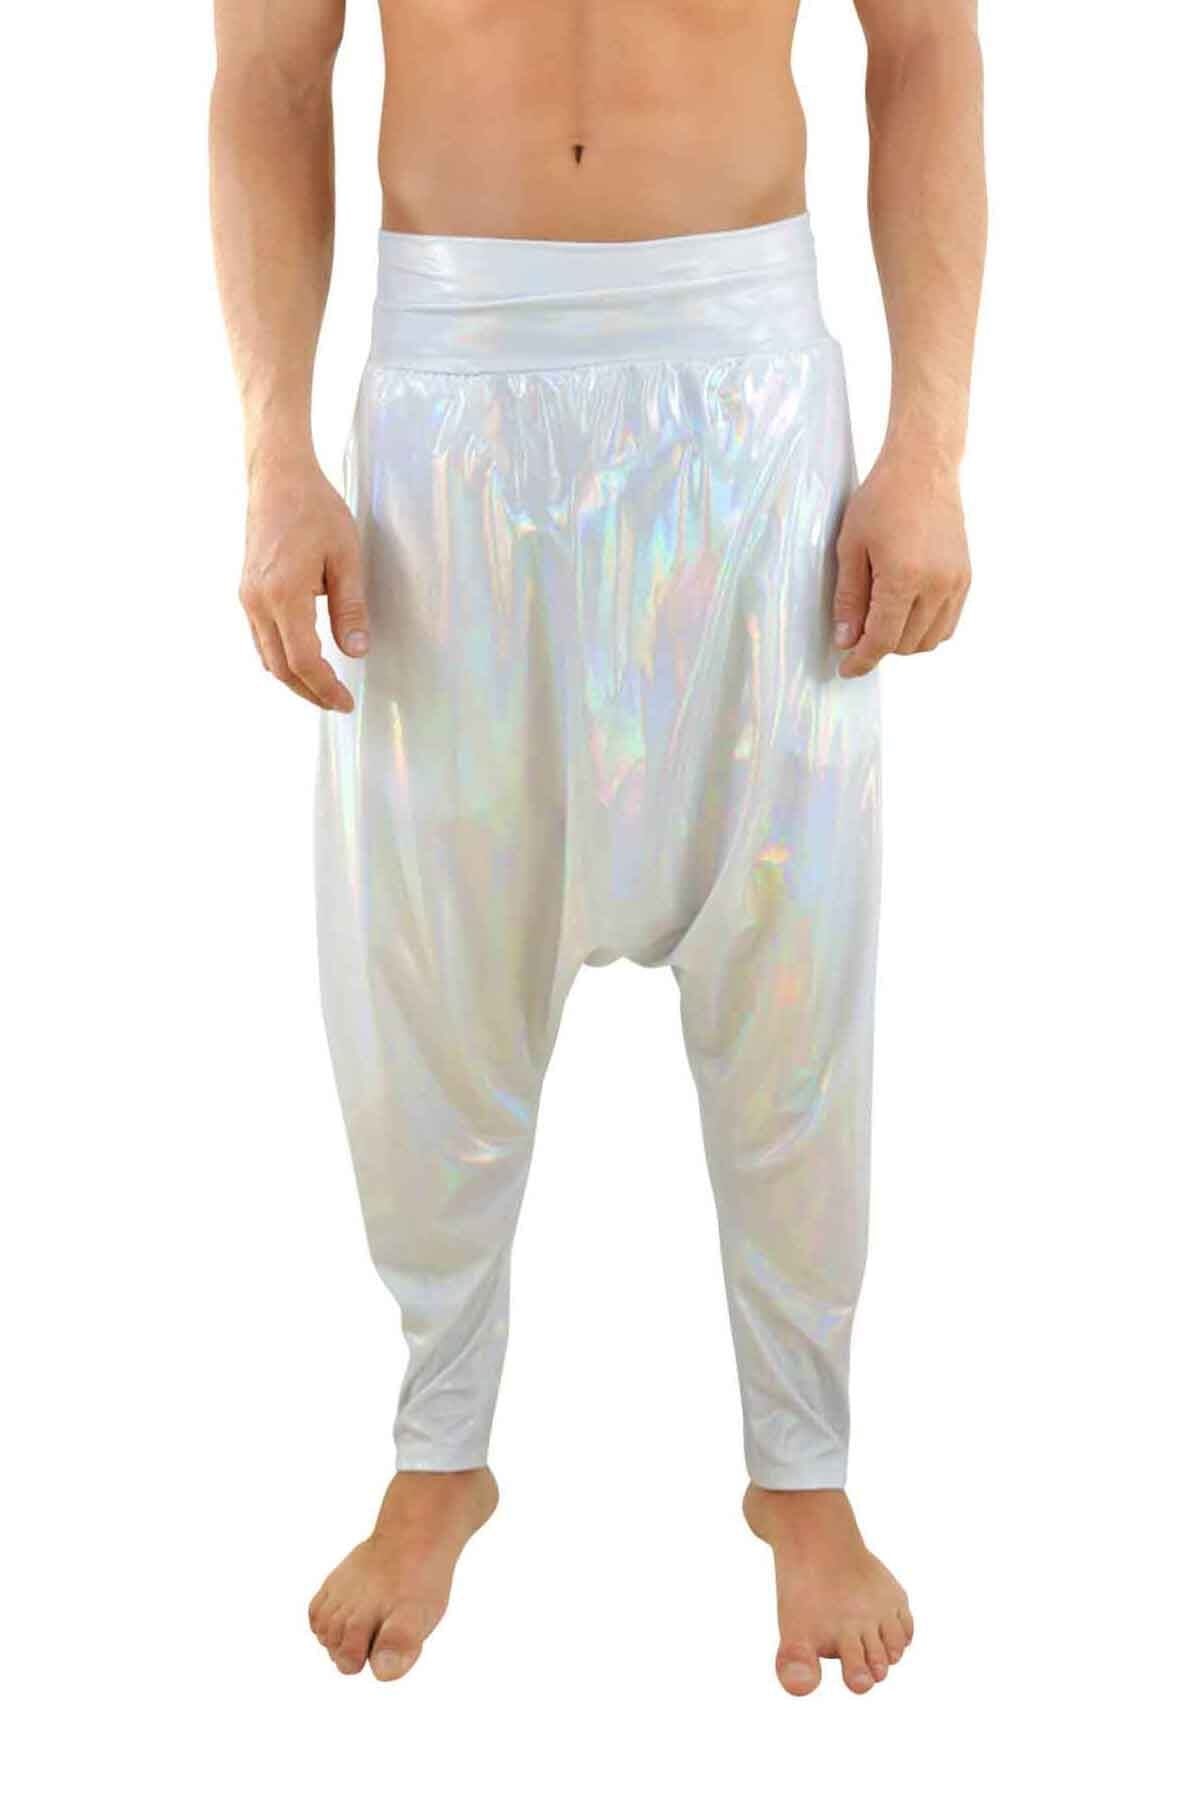 Mens rave harem pants in frosted holographic white from Love Khaos Rave Clothing Website